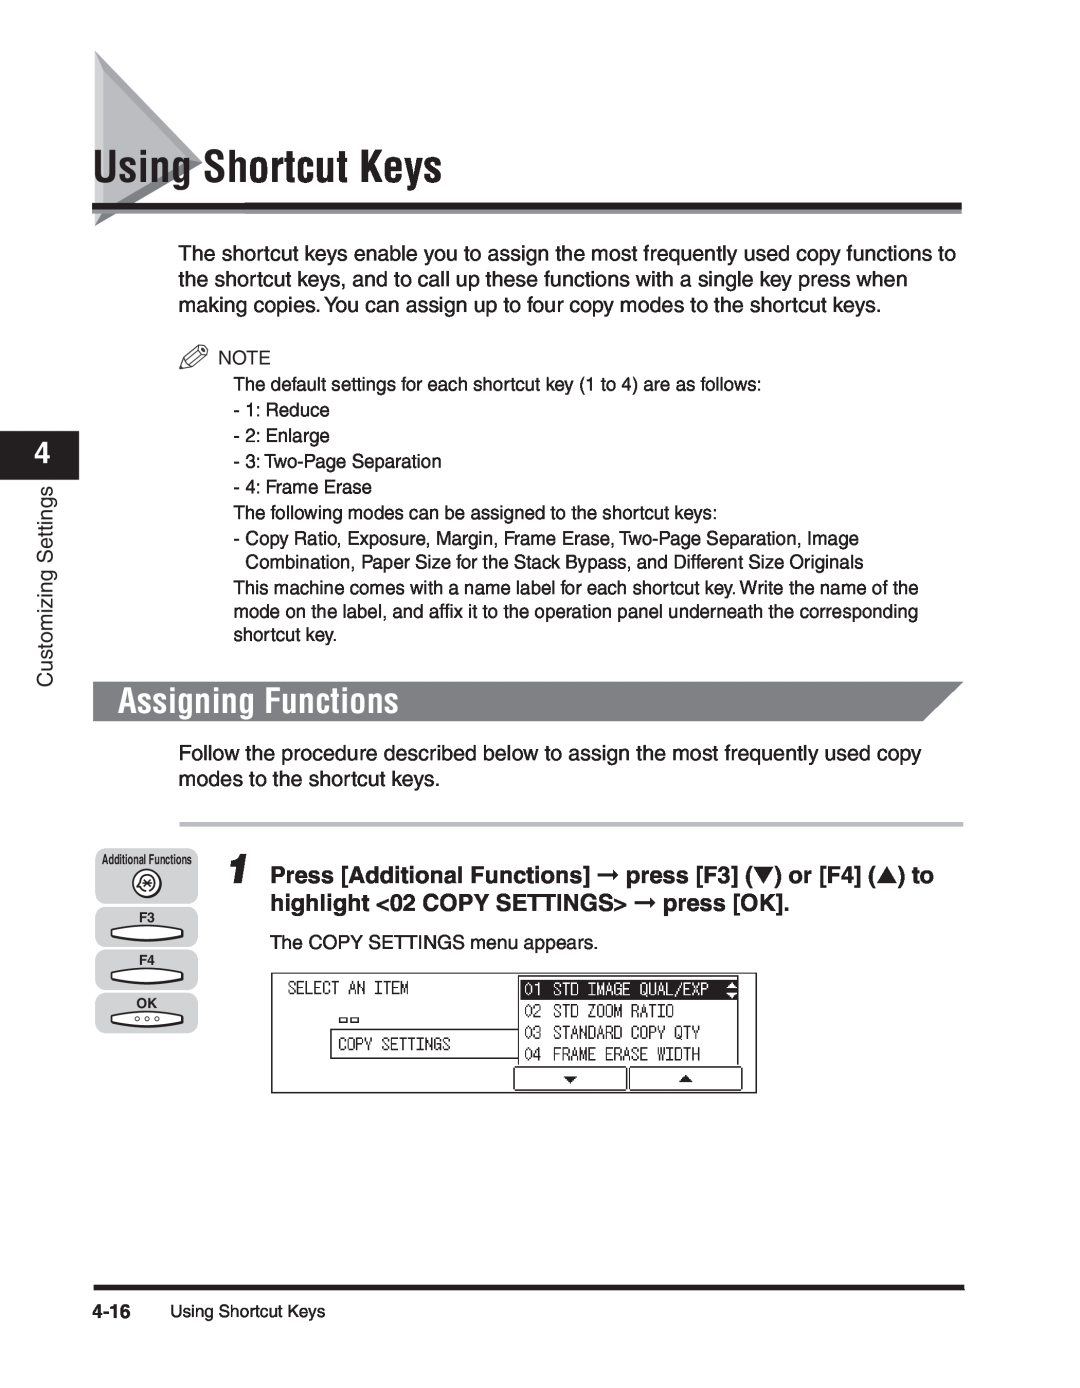 Canon 2300 manual Using Shortcut Keys, Assigning Functions 